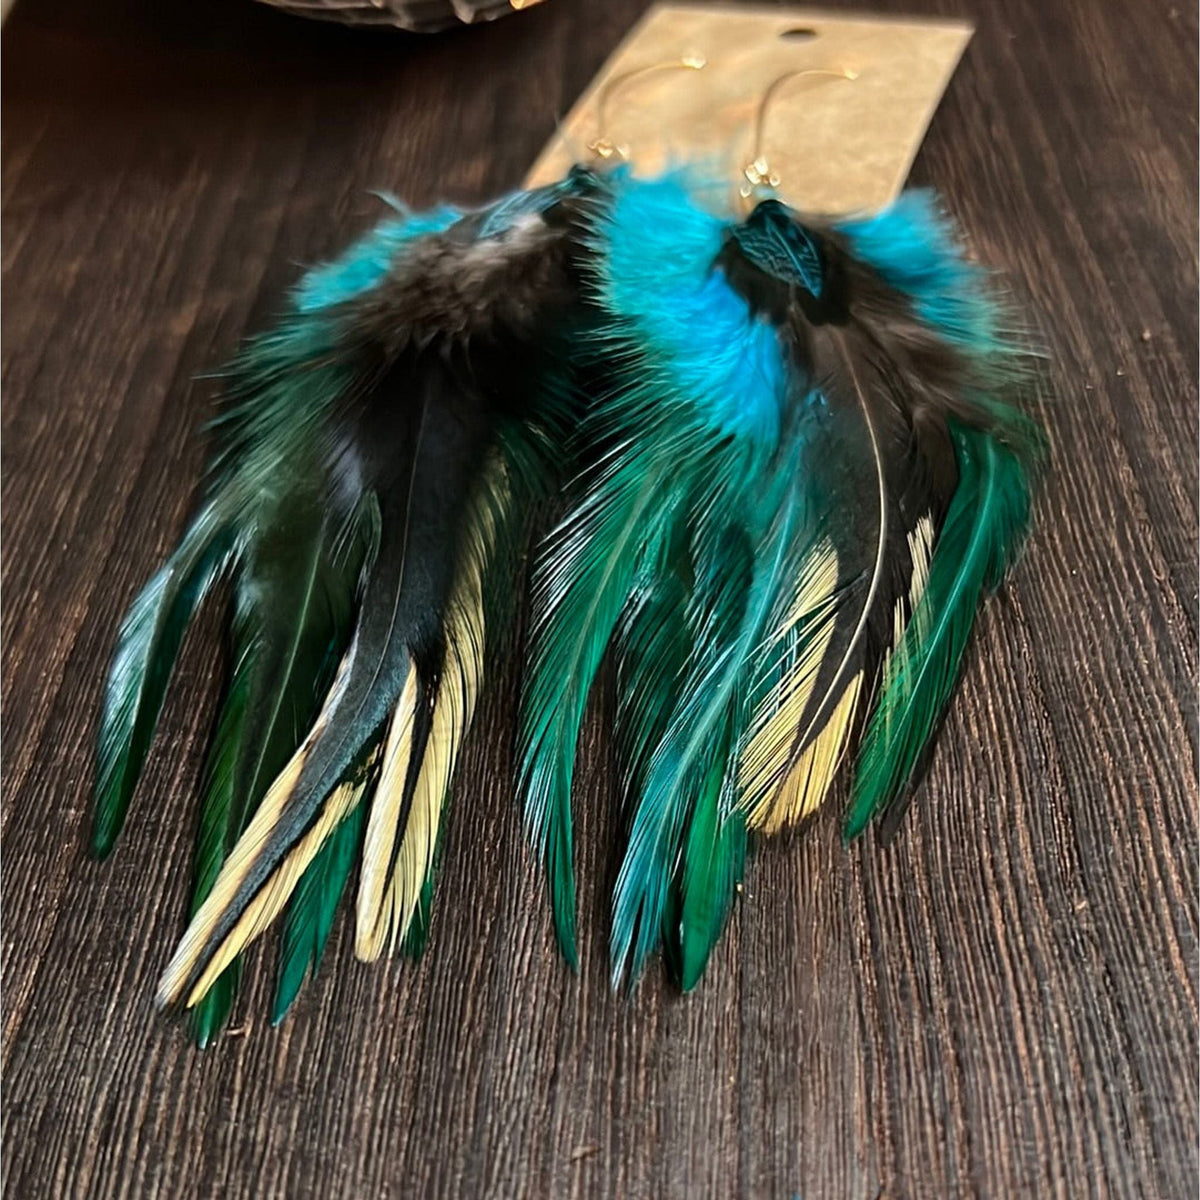 Fairytale Feathered Earrings Earrings TheFringeCultureCollective